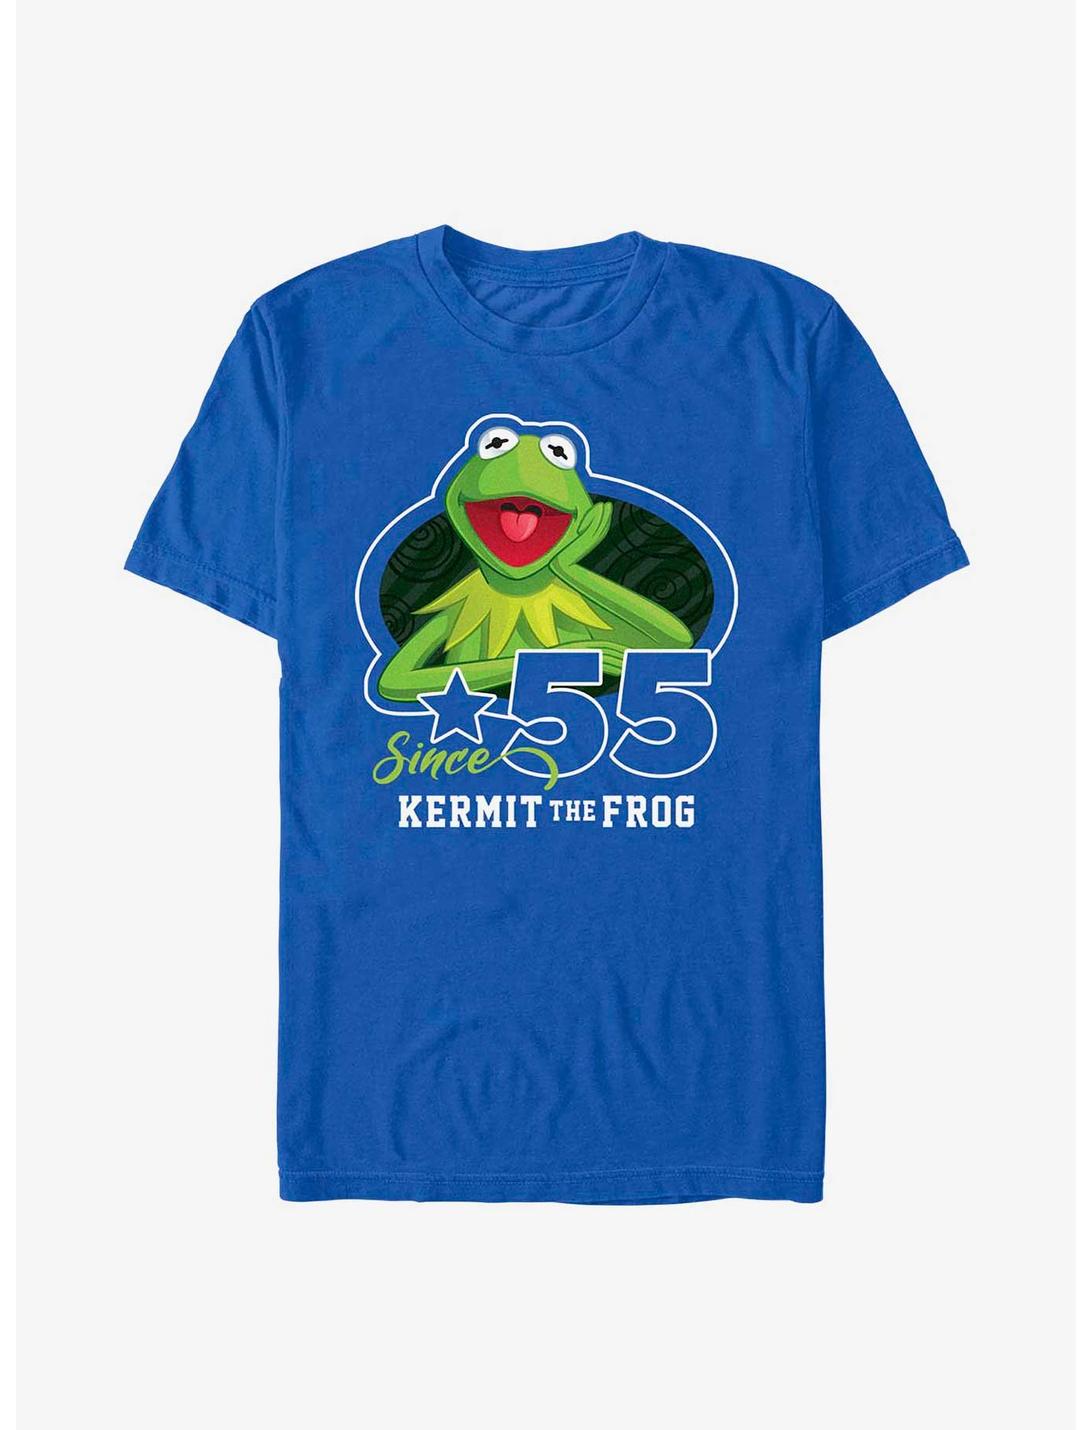 Disney The Muppets Kermit The Frog Since '55 T-Shirt, ROYAL, hi-res